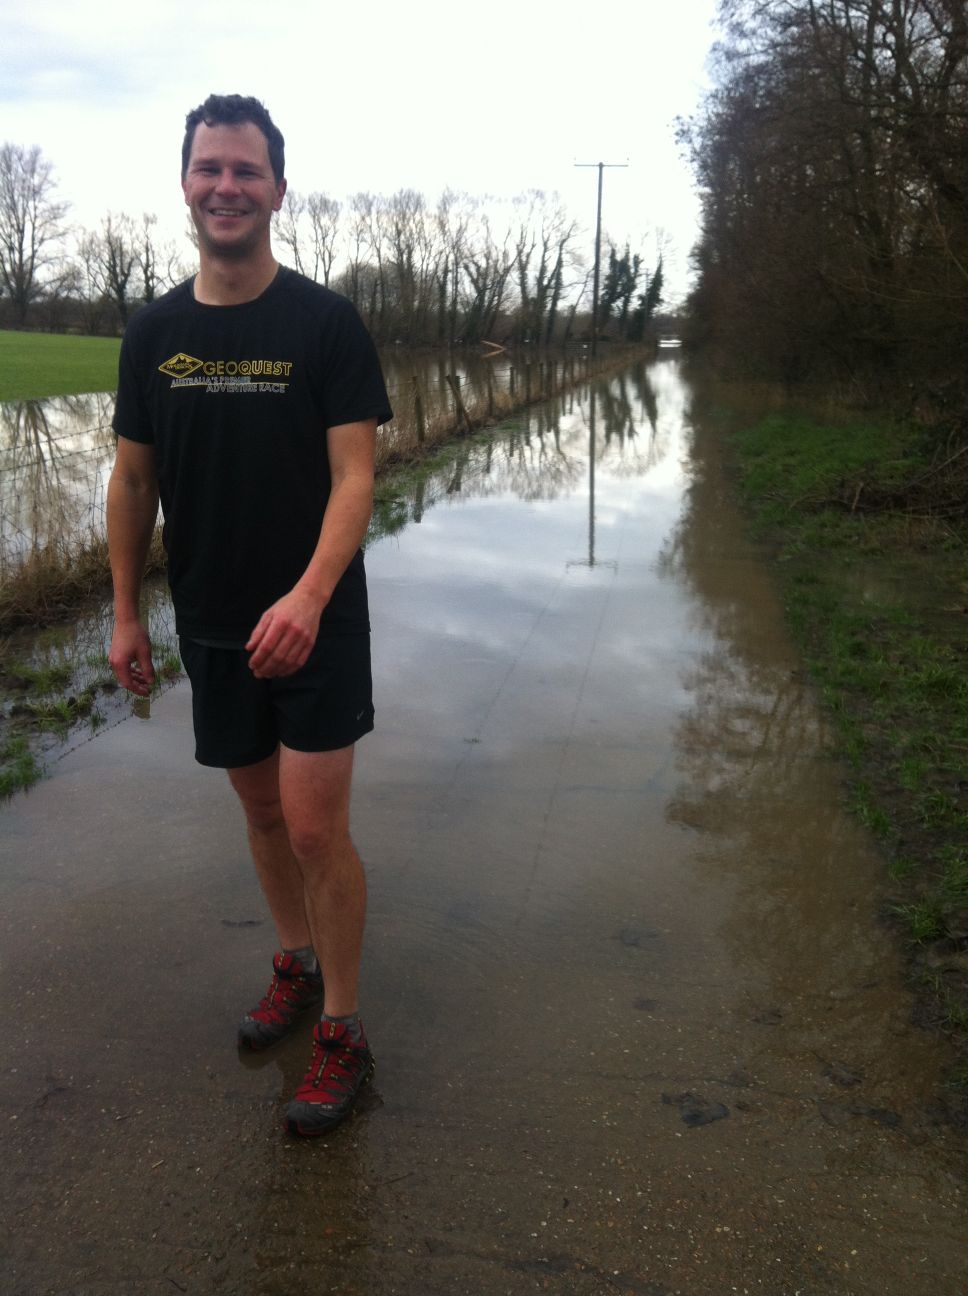 we didn't realise we should have brought a snorkel on our run...